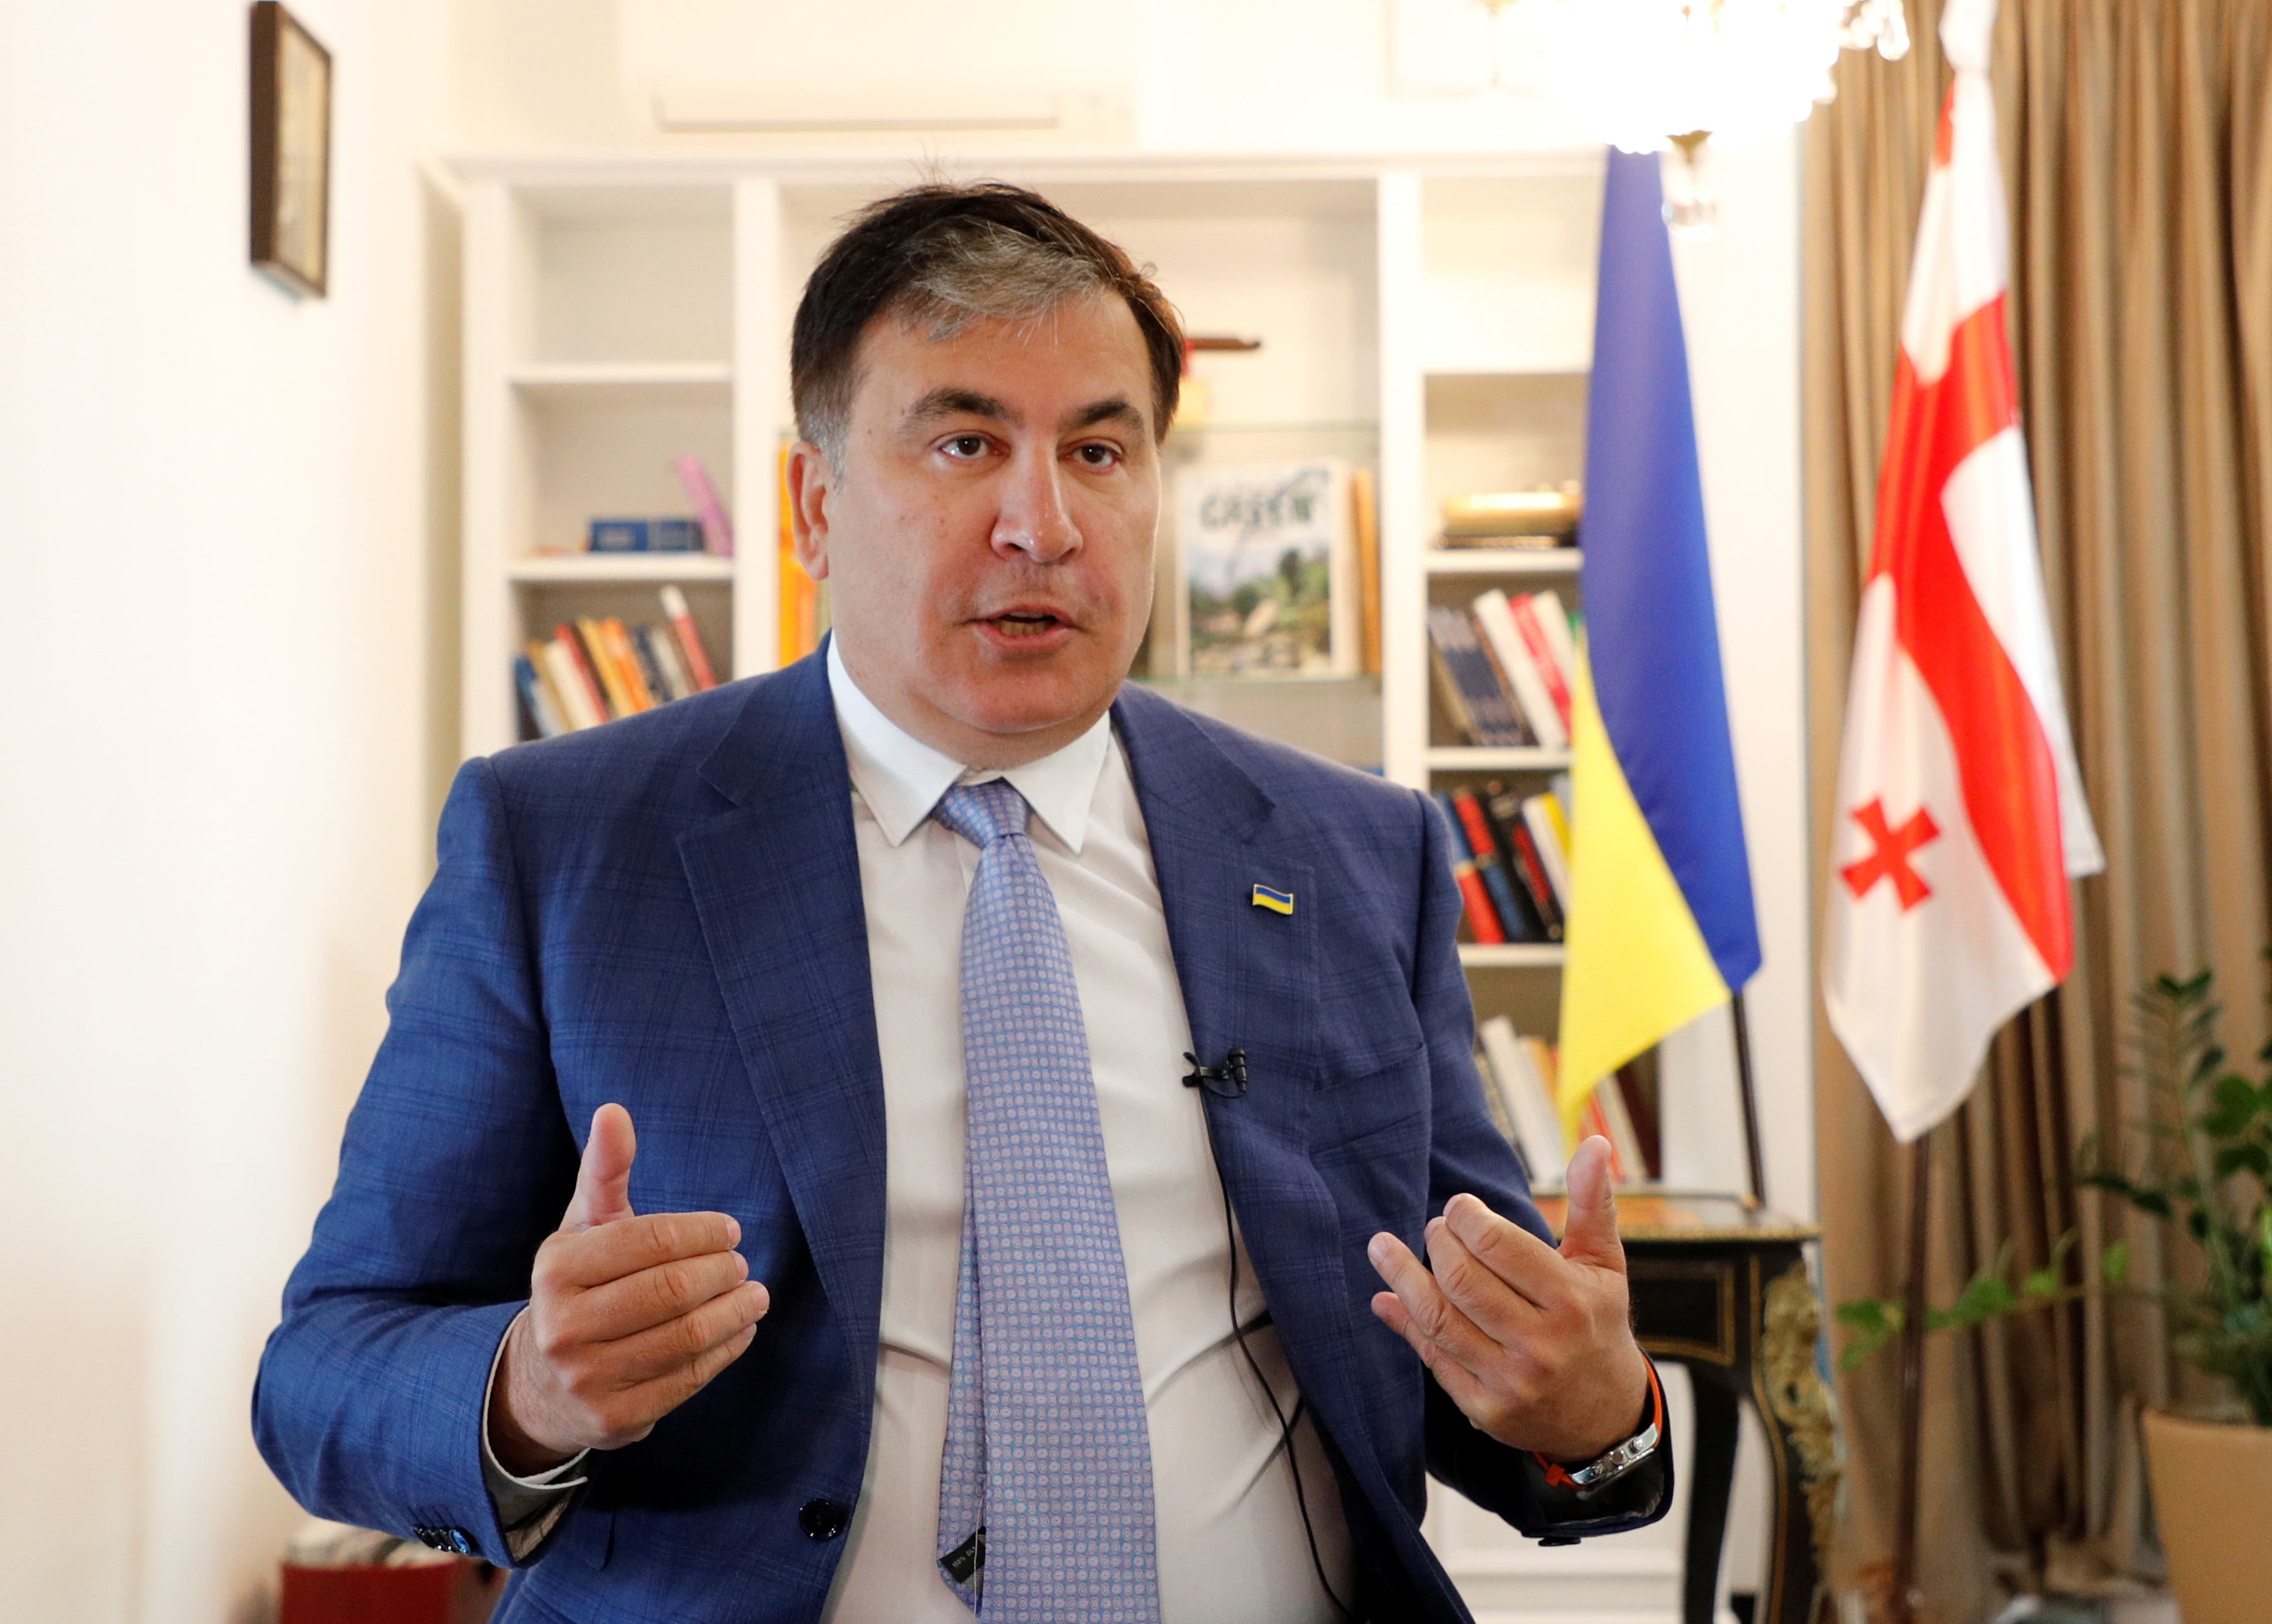 Mikheil Saakashvili, Georgia's former President and newly appointed head of the executive committee of Ukraine's National Reform Council attends an interview outside Kiev